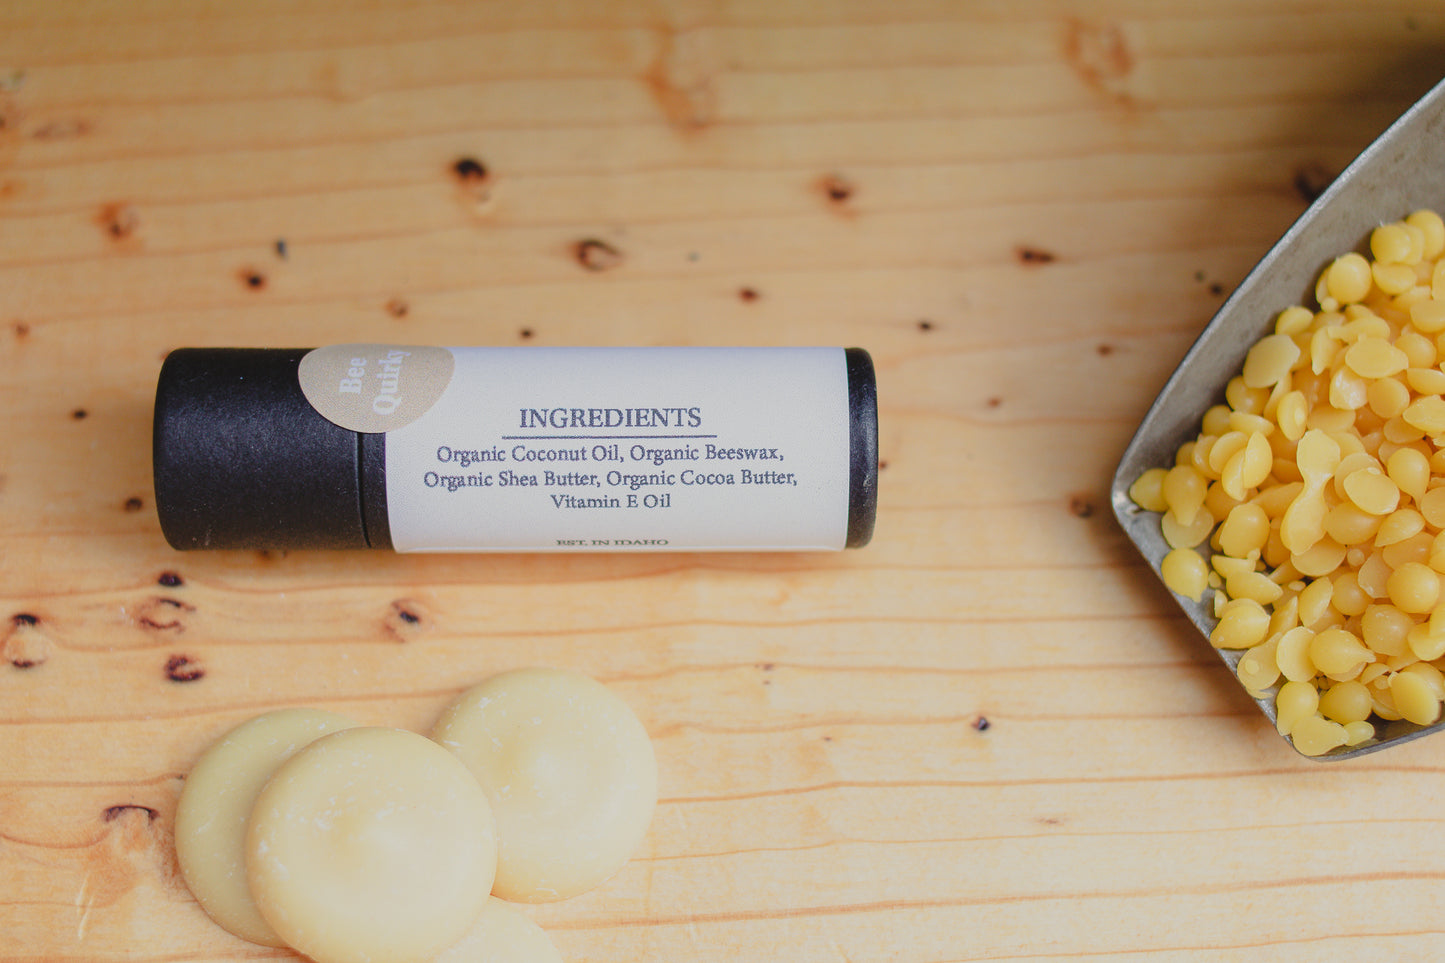 Eco-friendly Organic Unscented Lip Balm Tube 0.3 oz, Cardboard Tube, Beeswax and Coconut Oil, Gifts, Essential Oils